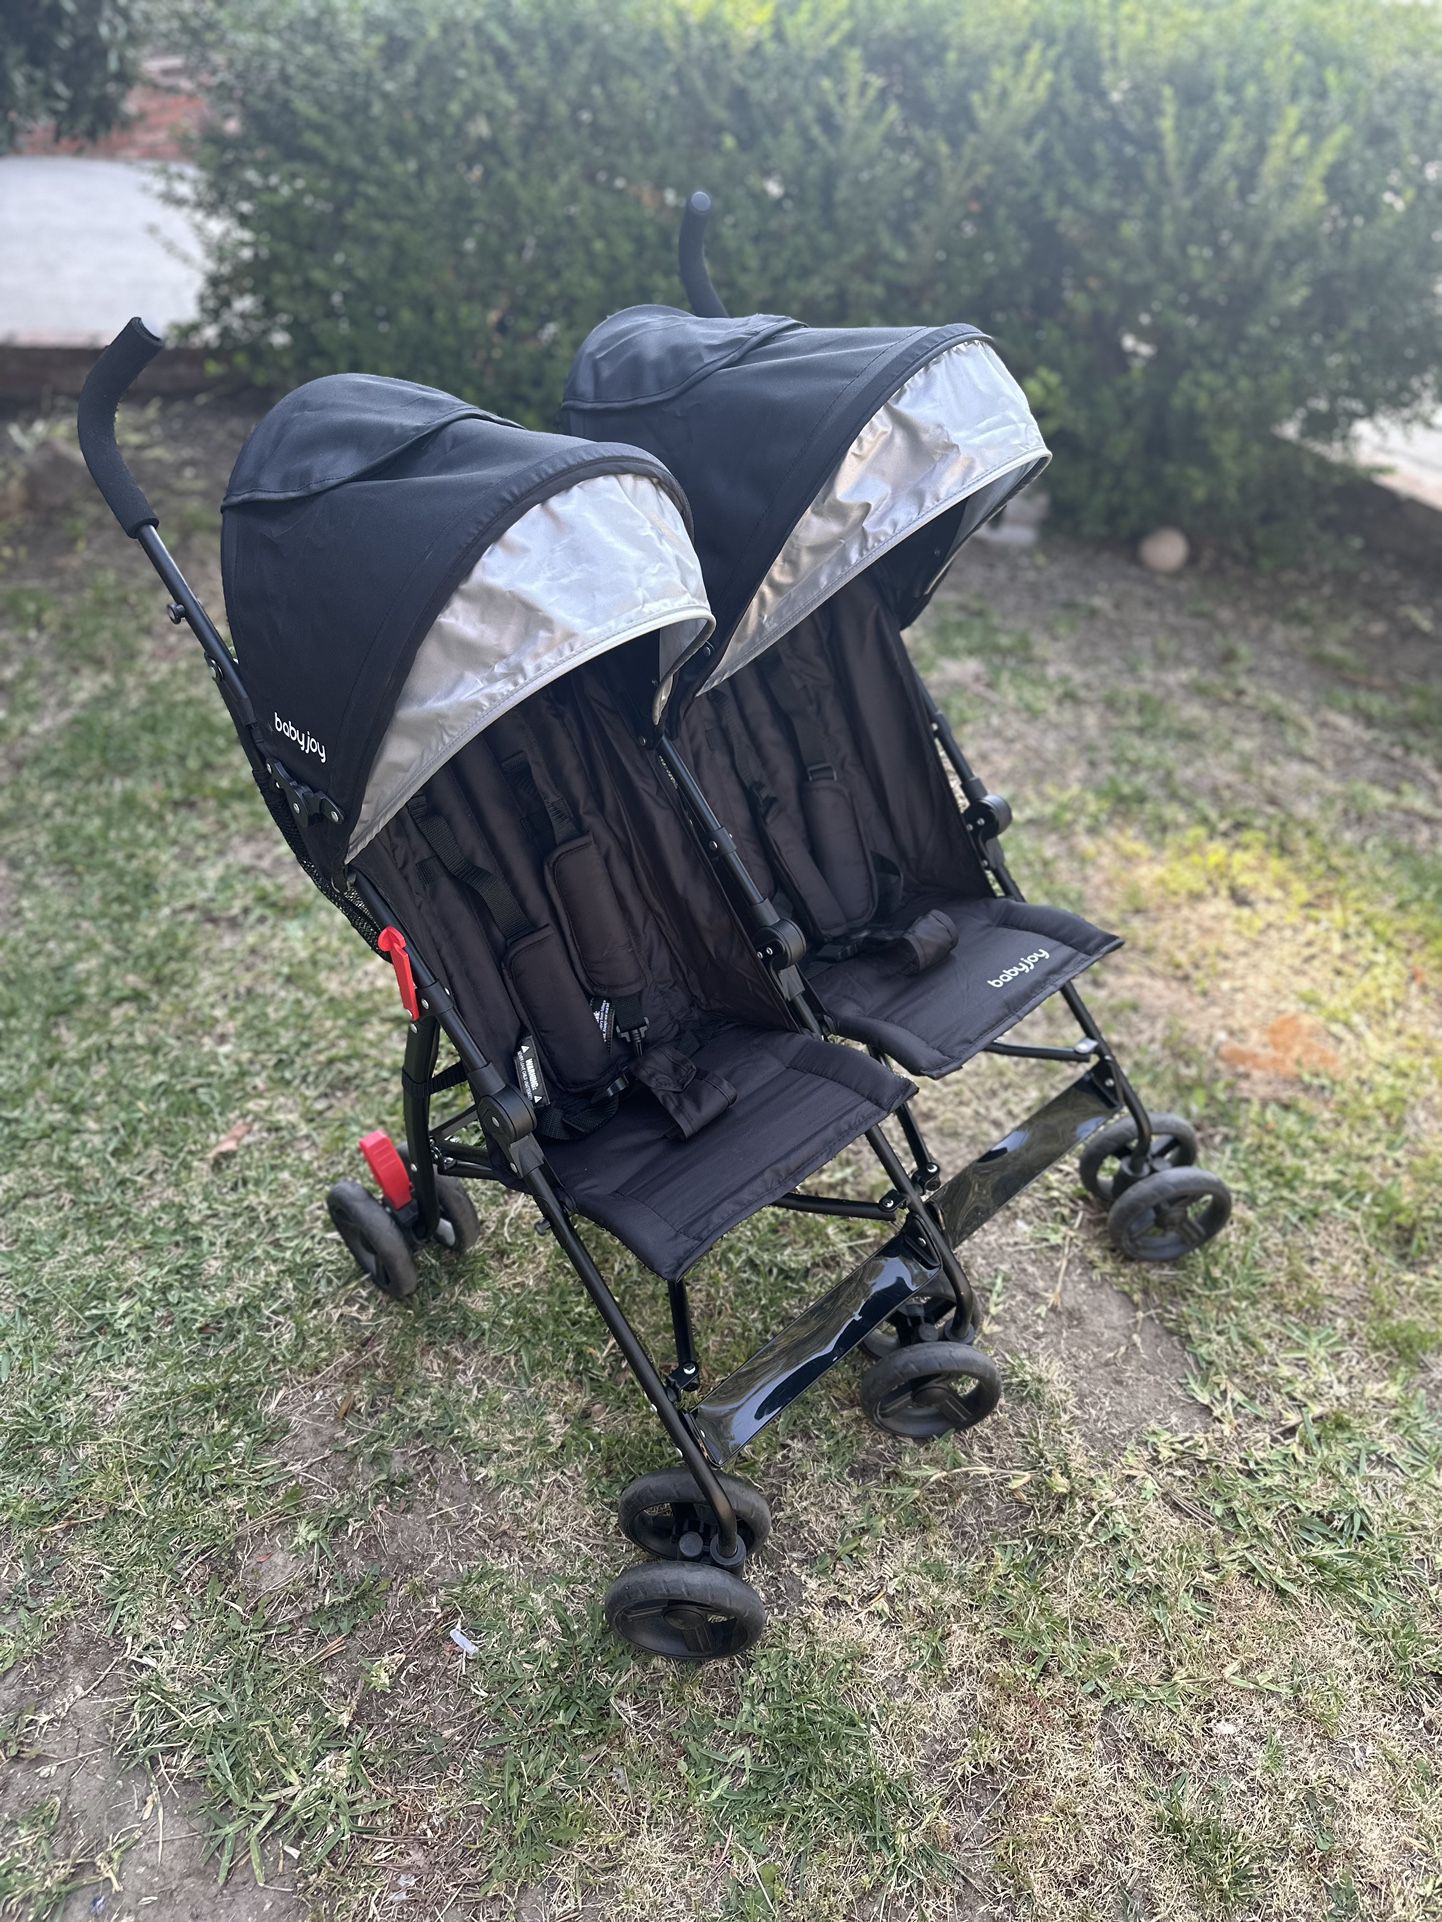 Double Light-Weight Stroller With 5-Point Harness, Sun Canopy, Cup Holder, Reclinable